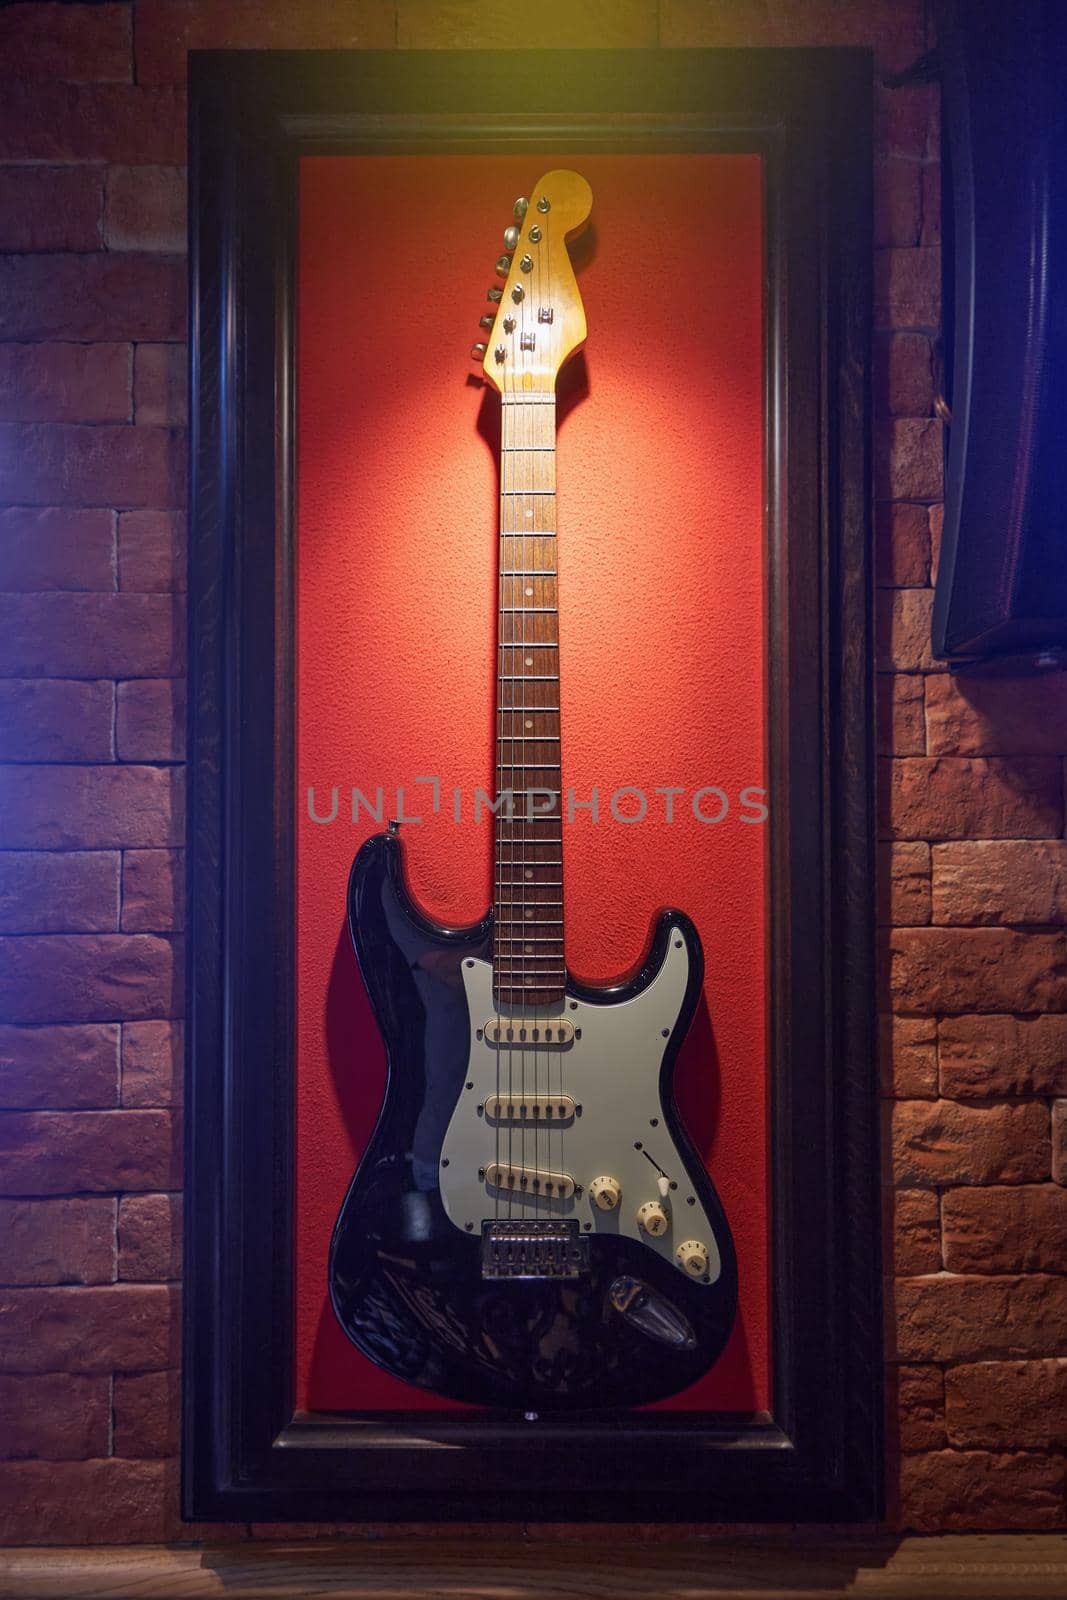 Electric guitar hanging on the wall in the restaurant for decoration.